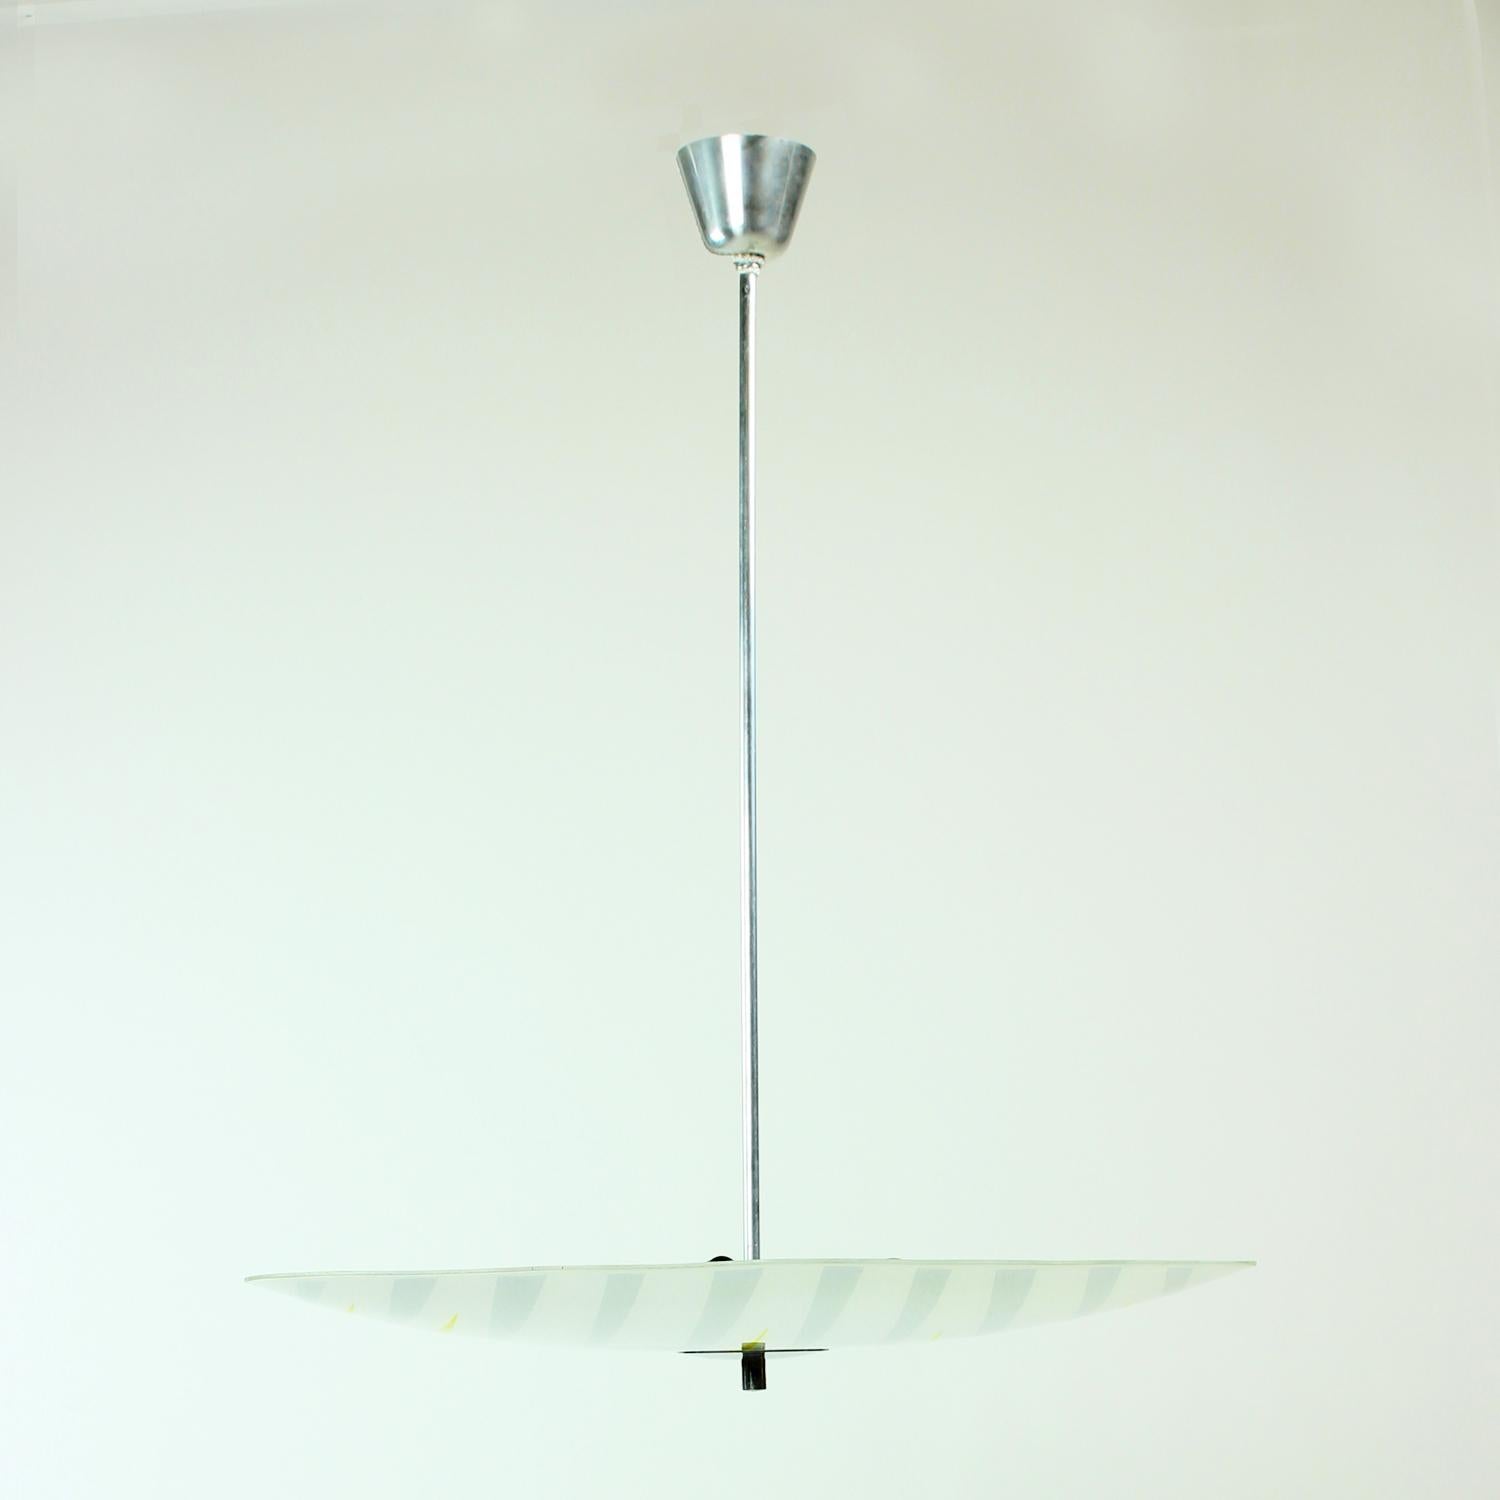 Very elegant glass plate light produced by Napako Company in Czechoslovakia in 1960s. The light is very typical for the midcentury design era, also known as Brussels era in Czechoslovakian design. This is the era of EXPO a design exhibition held in